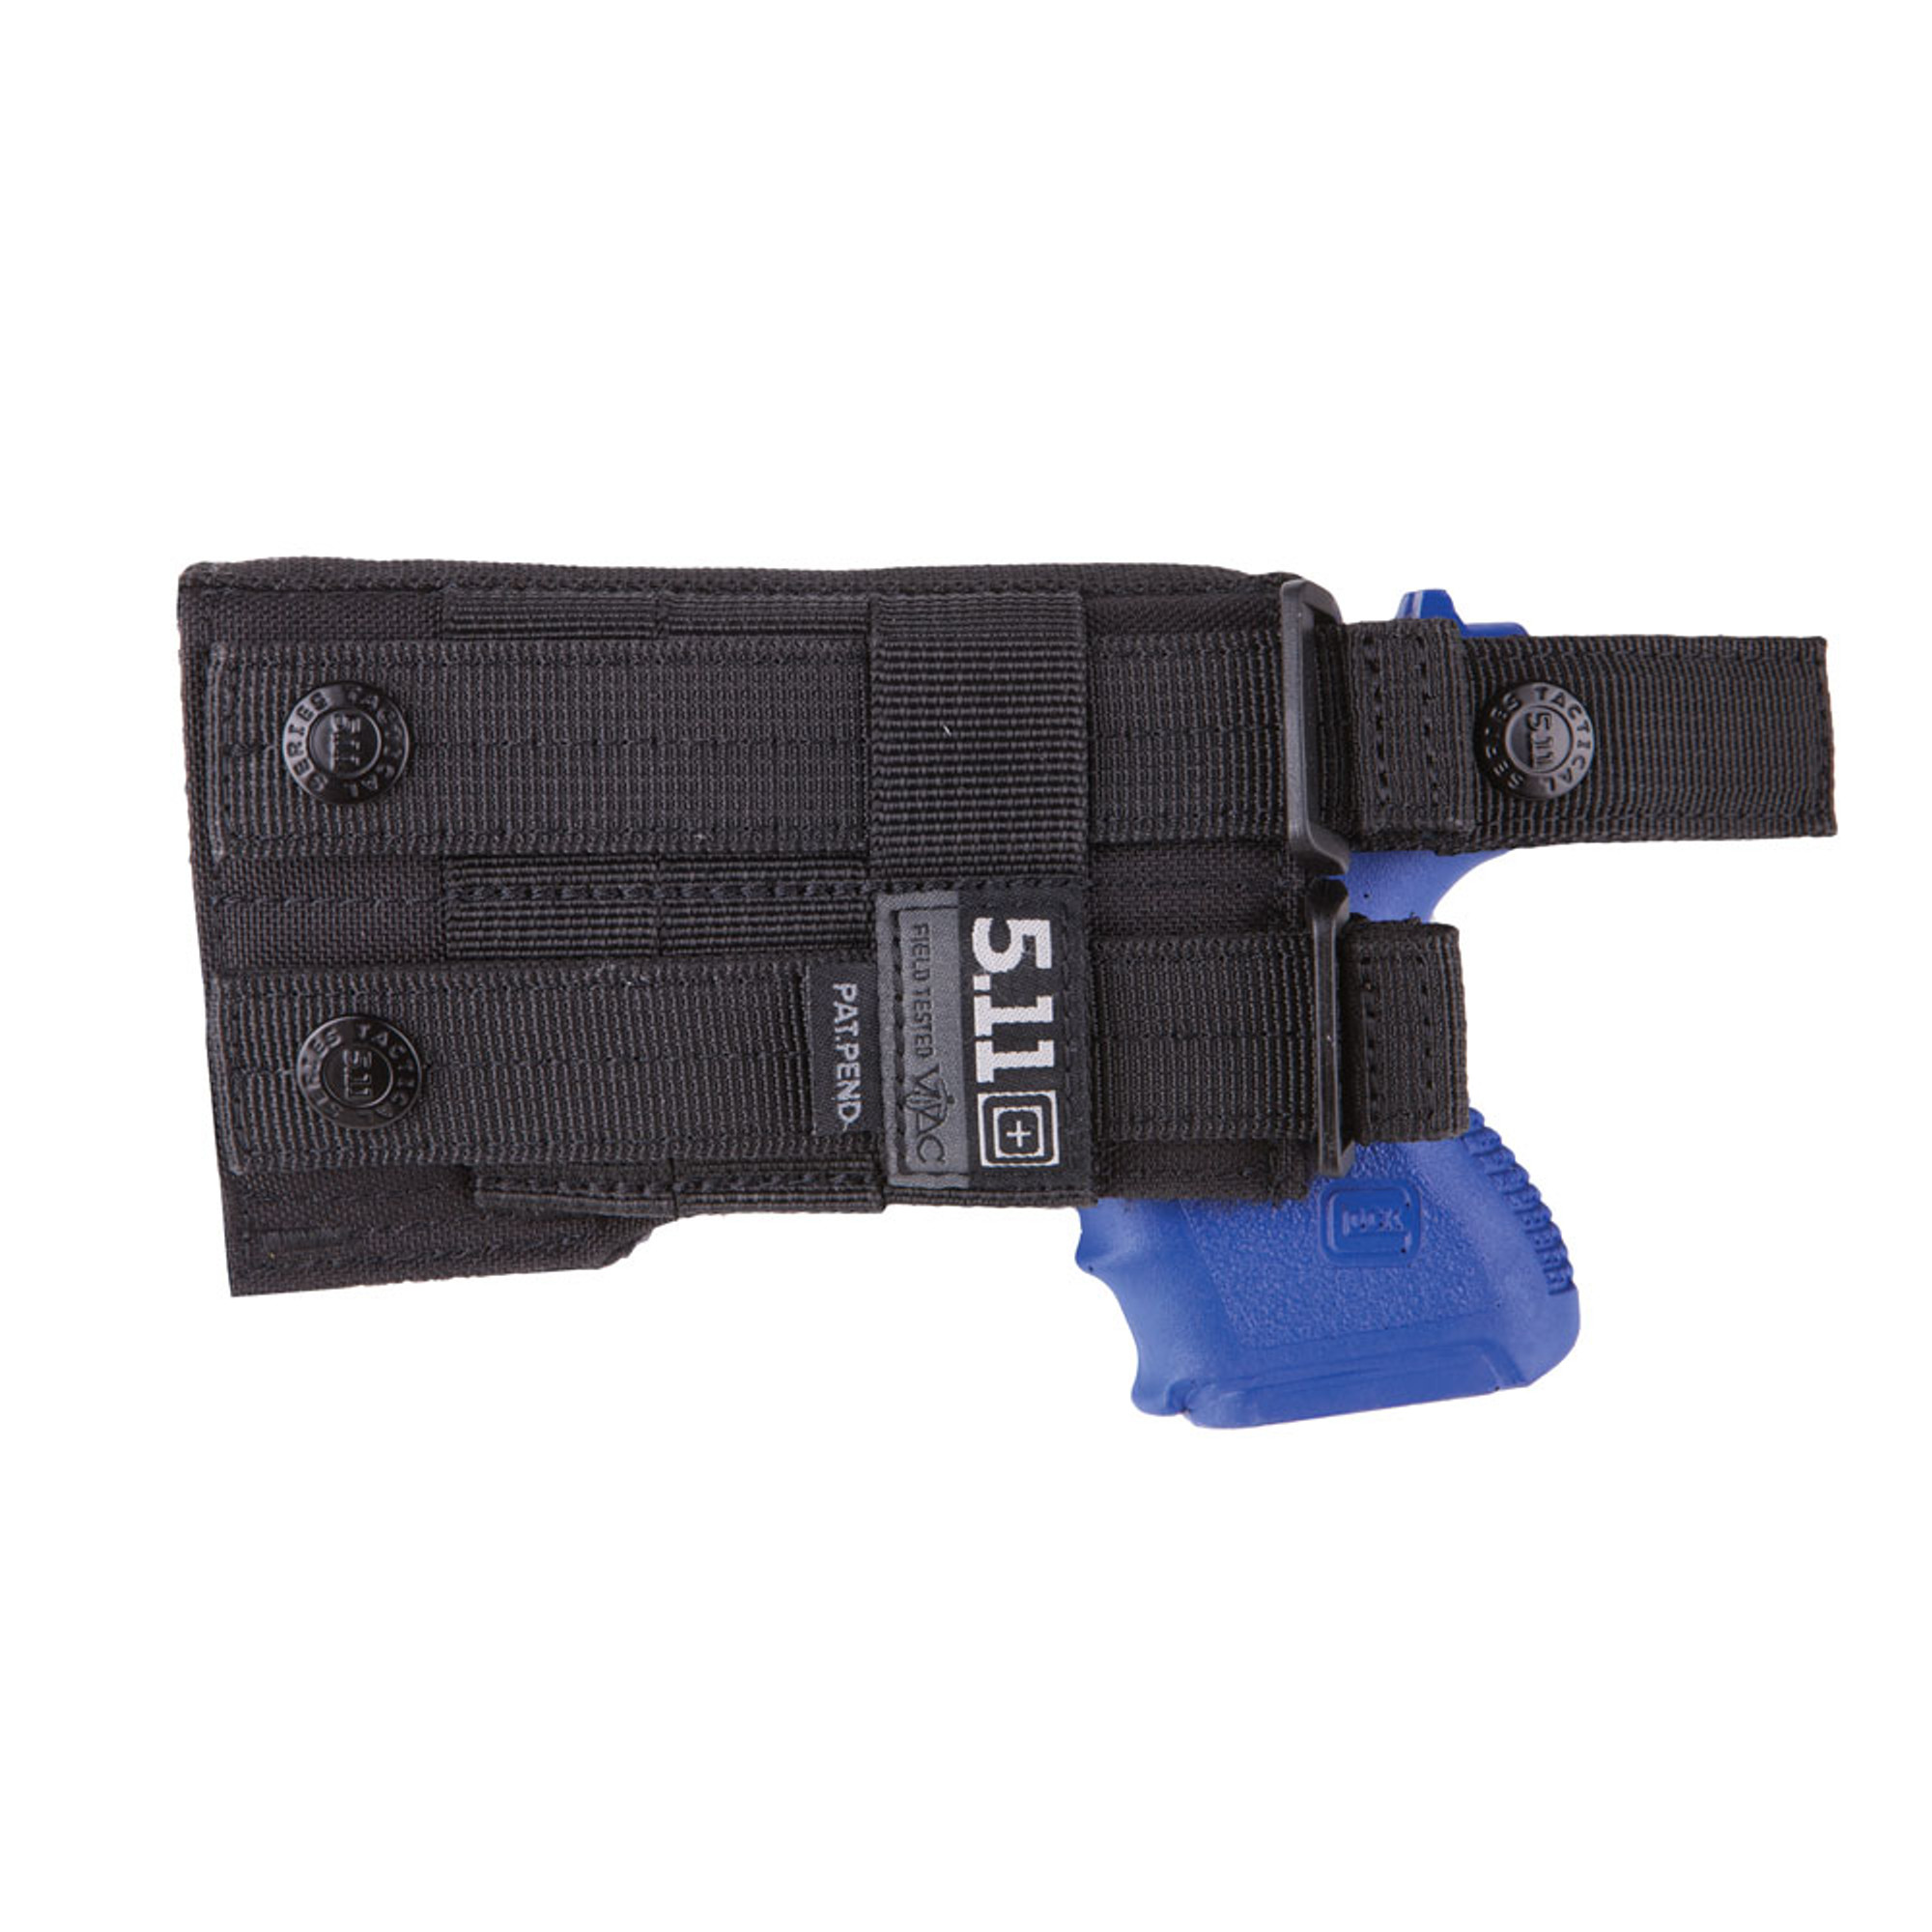 5.11 LBE Compact Holster - Left Hand